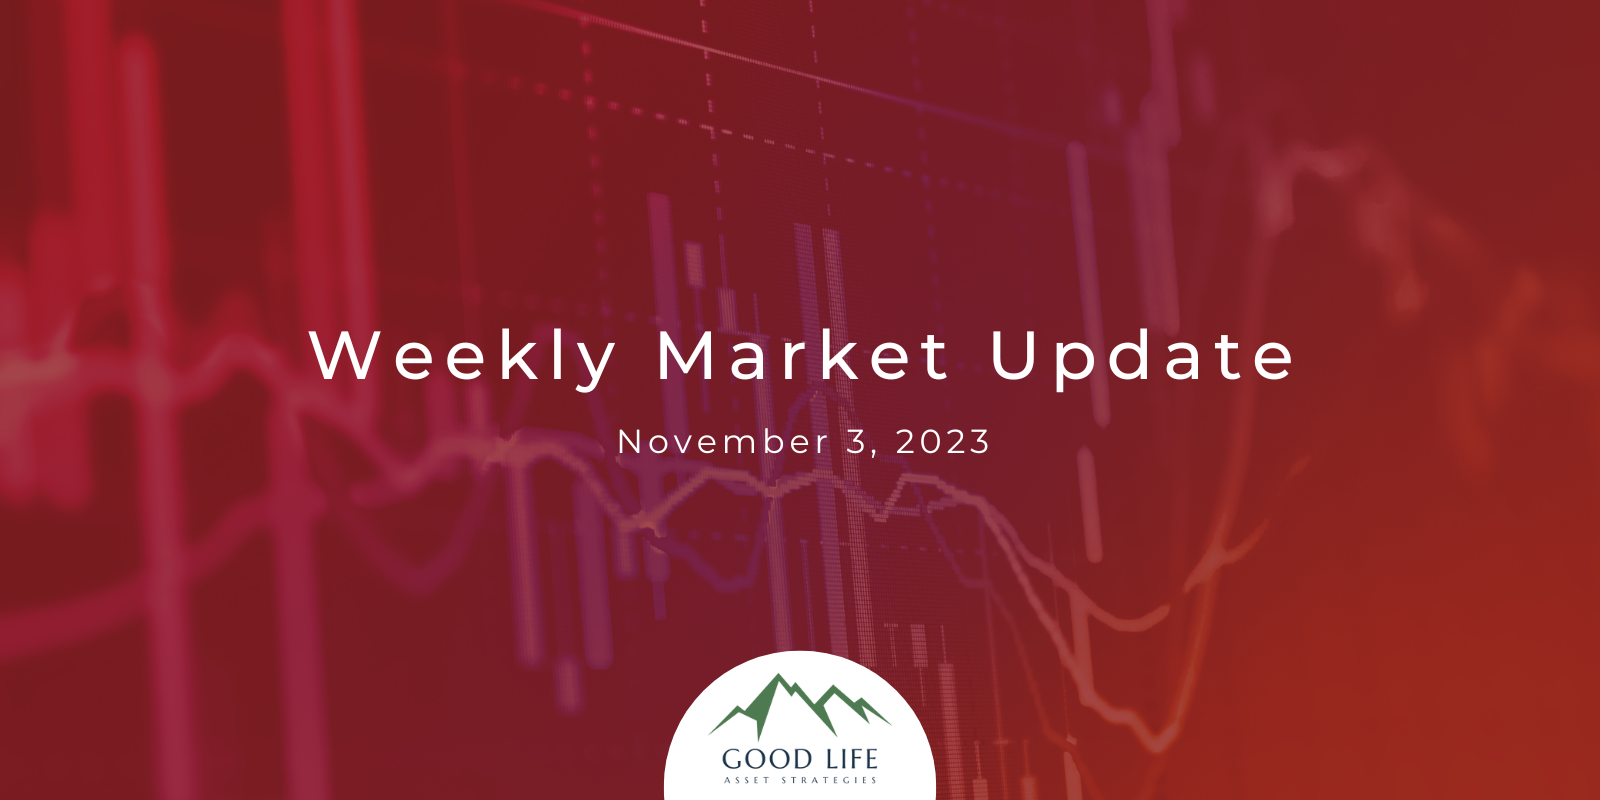 Weekly Market Update for November 3, 2023, from DeWayne Hall: Using the RSI to Analyze Market Momentum